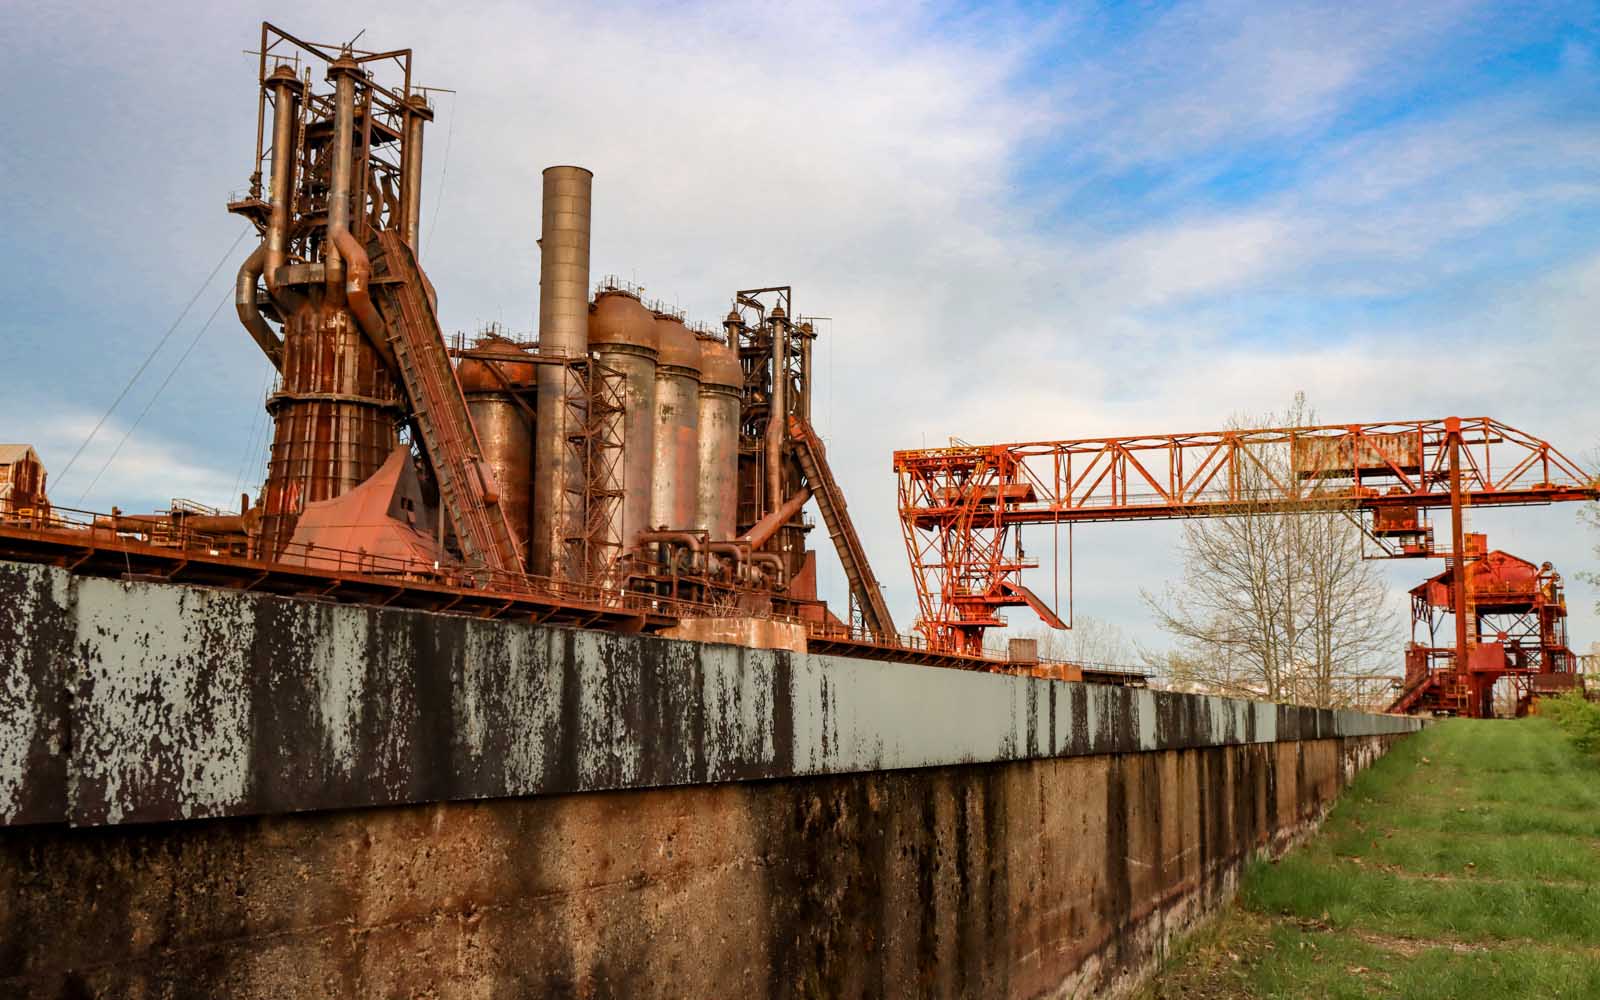 The Carrie Blast Furnaces reflect golden hour light.